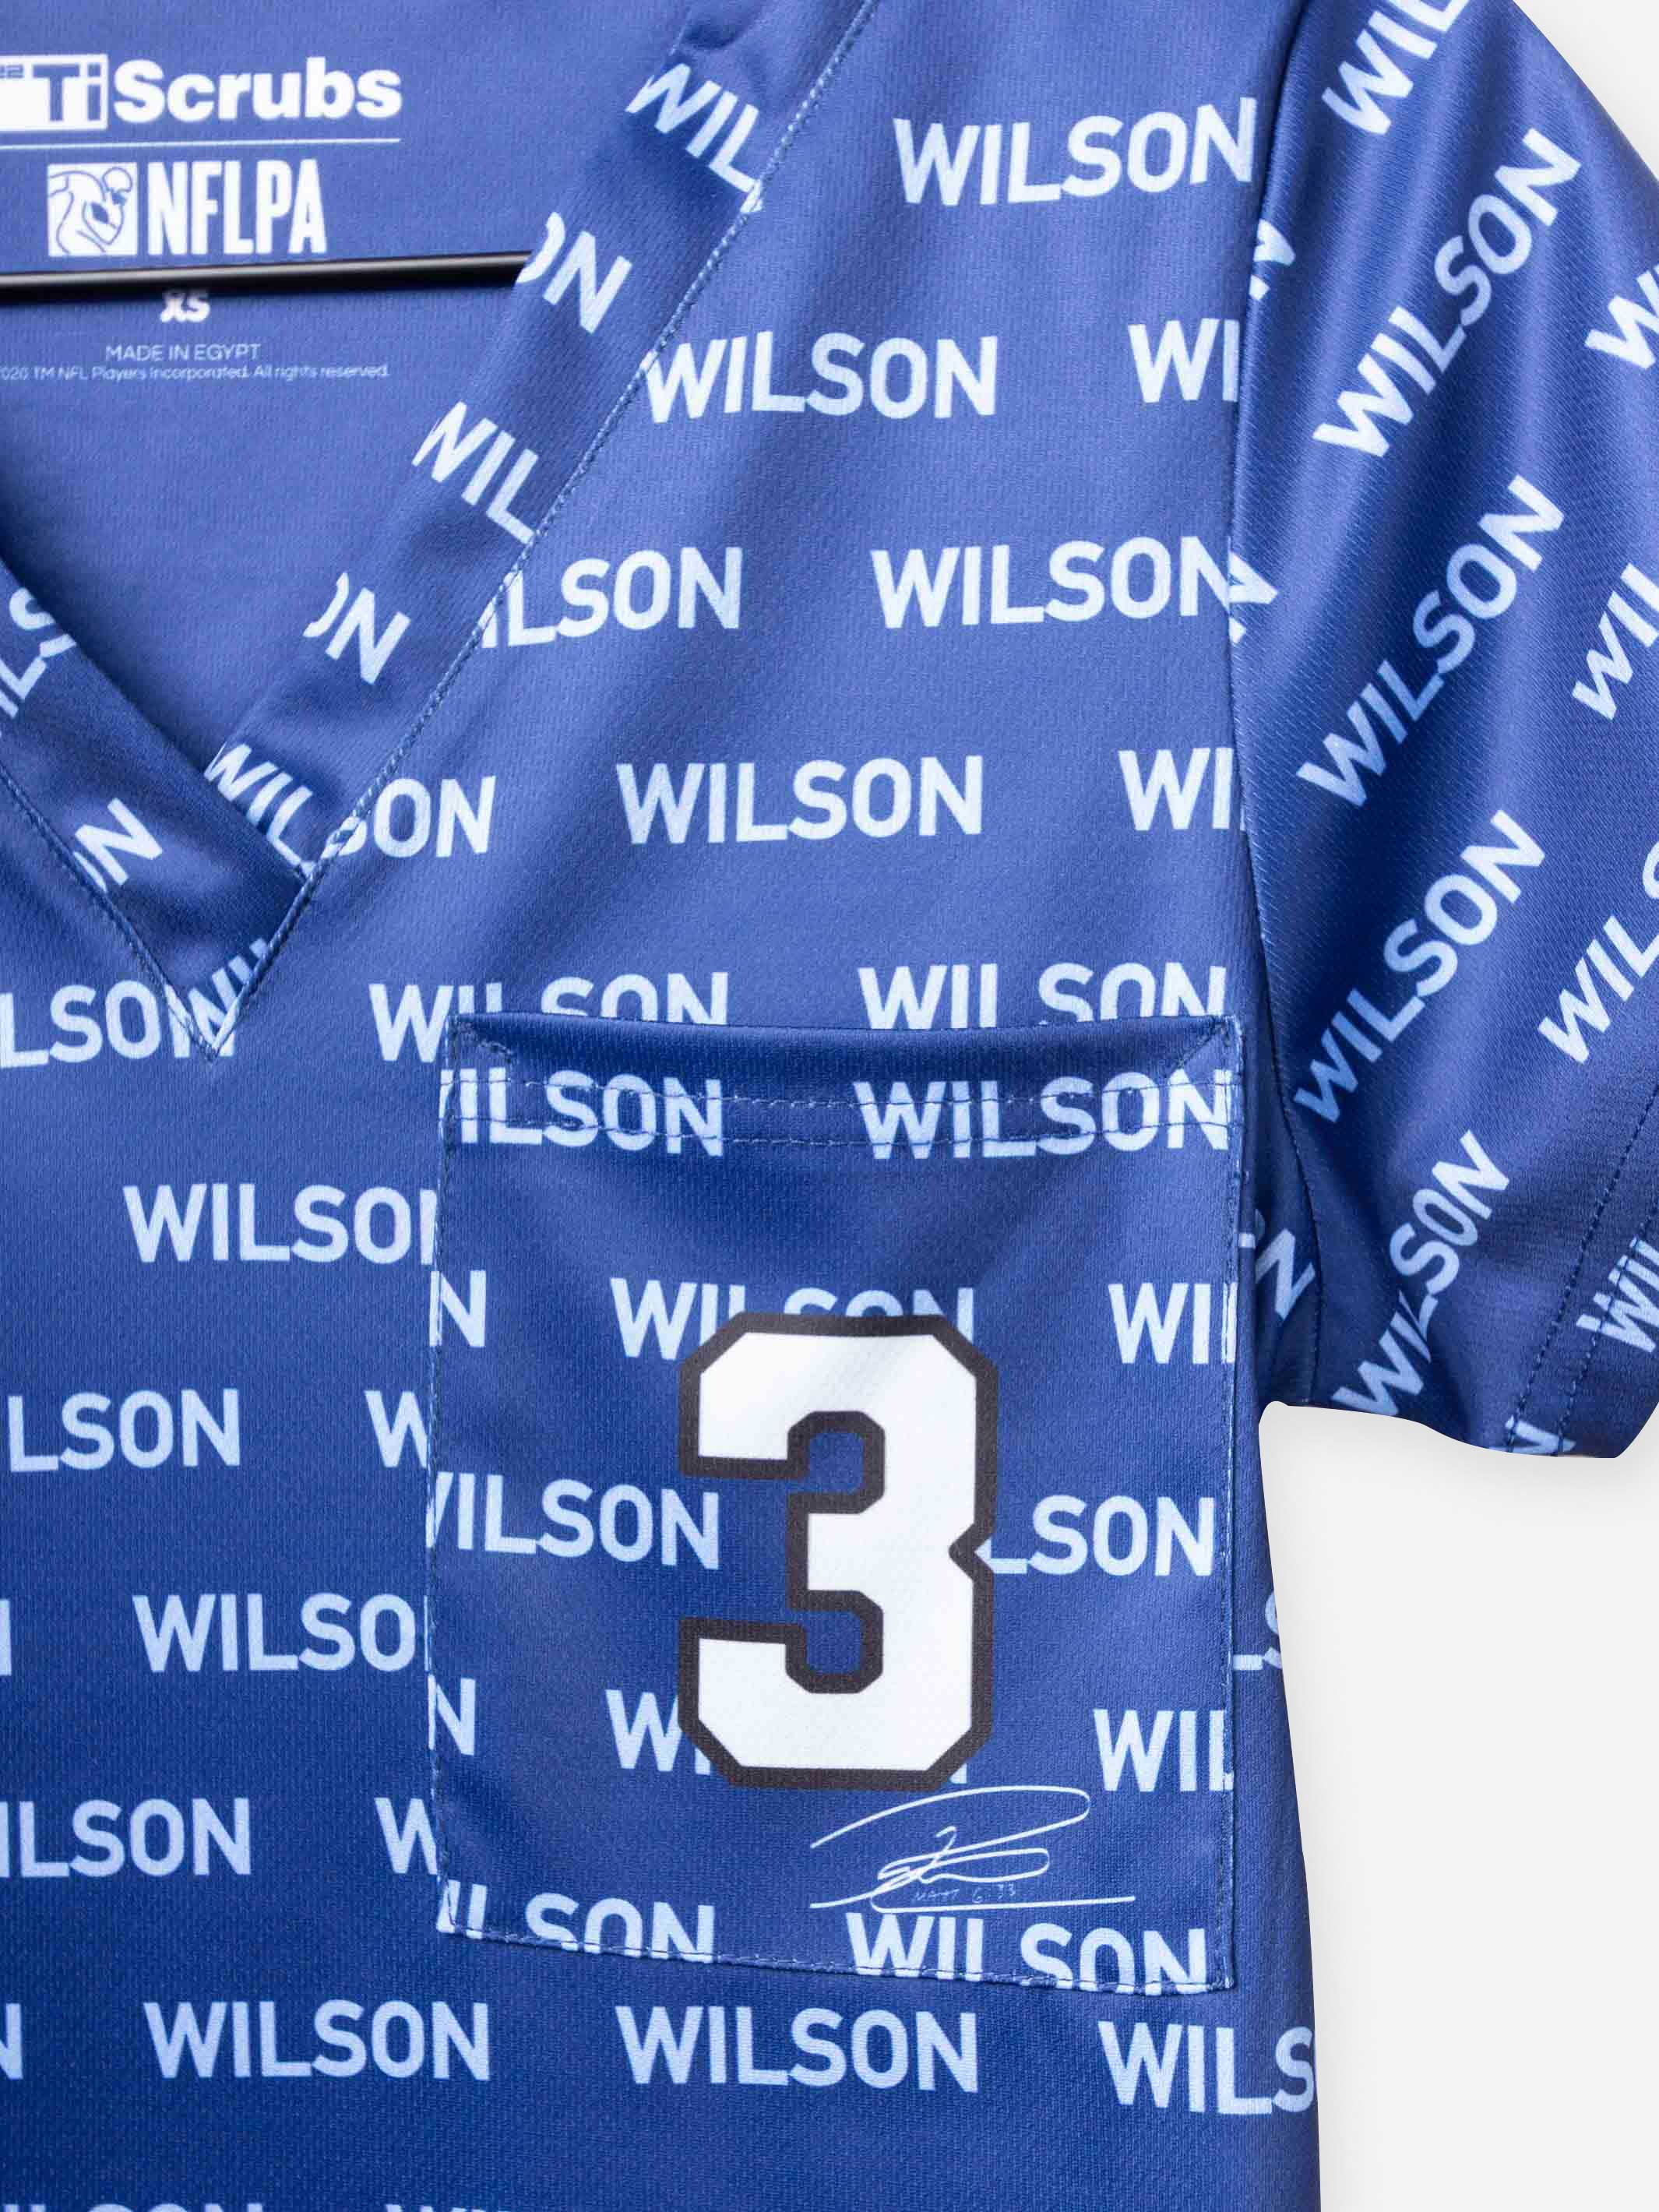 Women&#39;s NFLPA Russel Wilson Jersey Scrub Top number 3 with signature